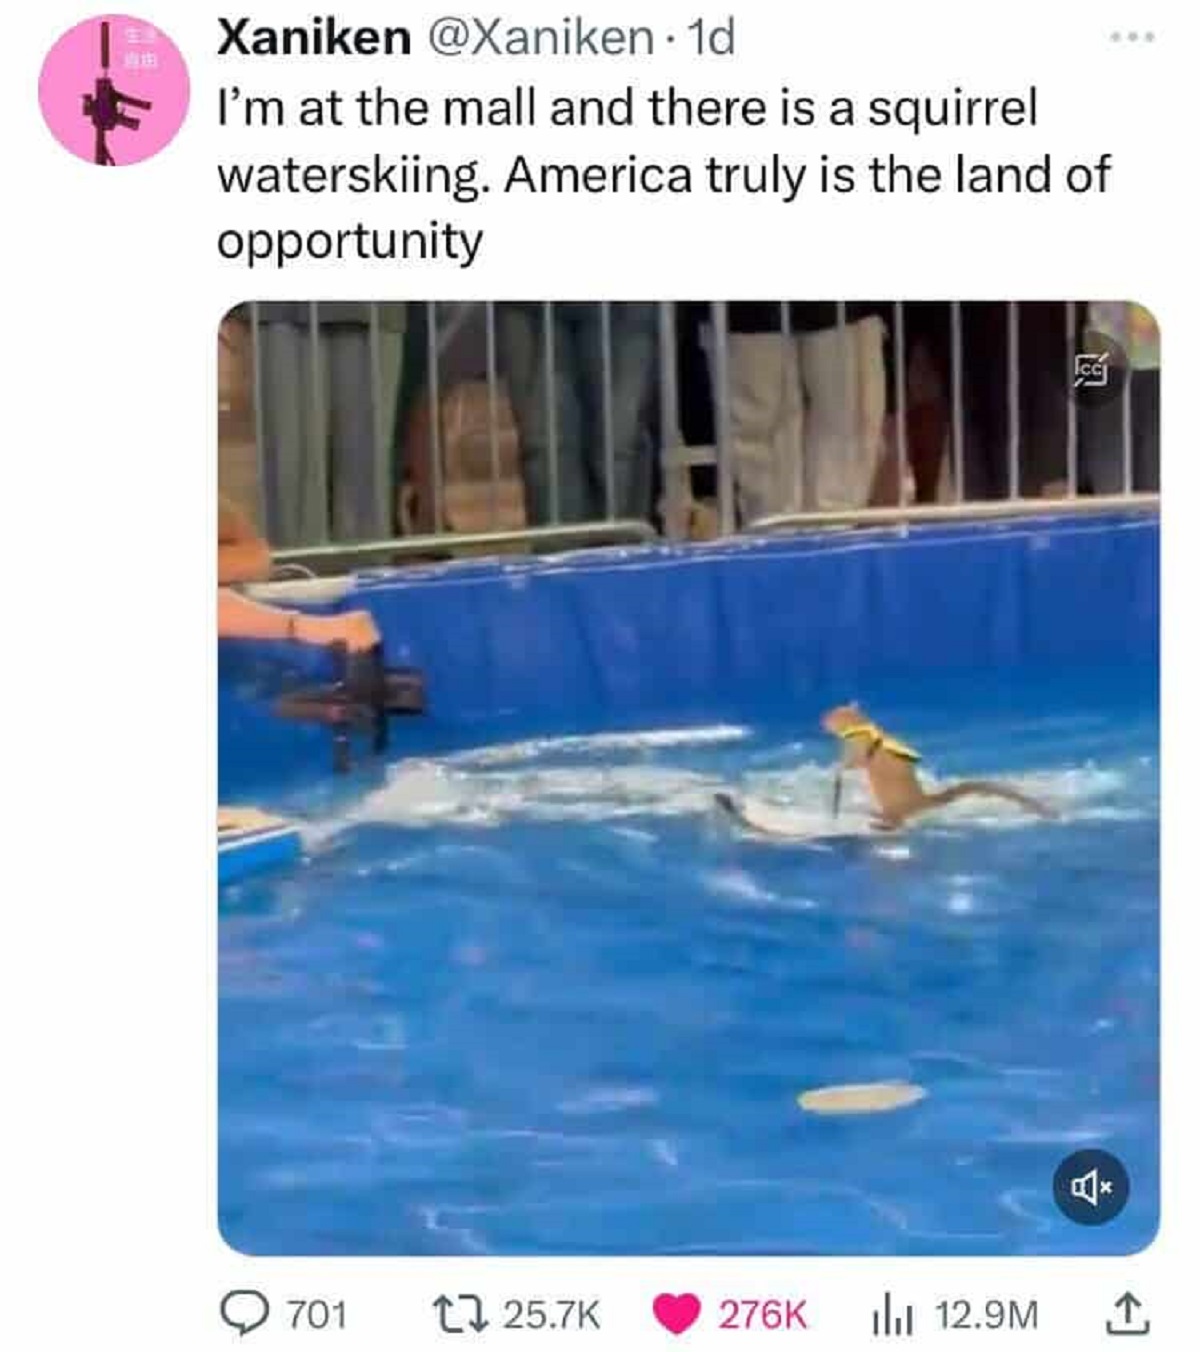 common bottlenose dolphin - Xaniken . 1d I'm at the mall and there is a squirrel waterskiing. America truly is the land of opportunity 701 ili 12.9M B